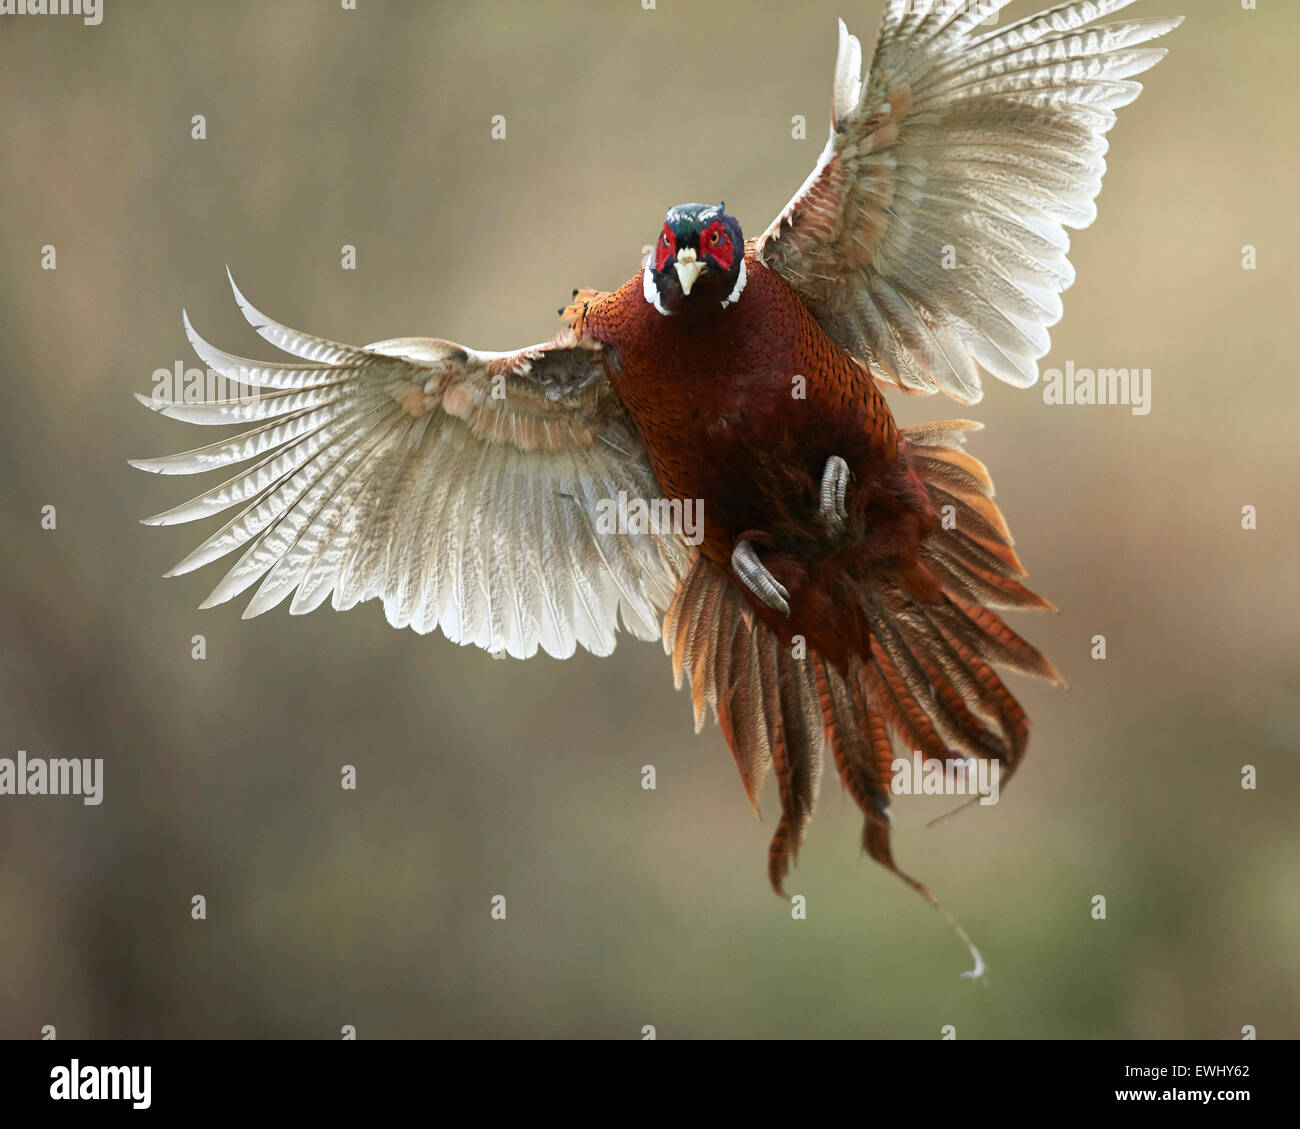 Cock pheasant rooster flying towards the camera Stock Photo